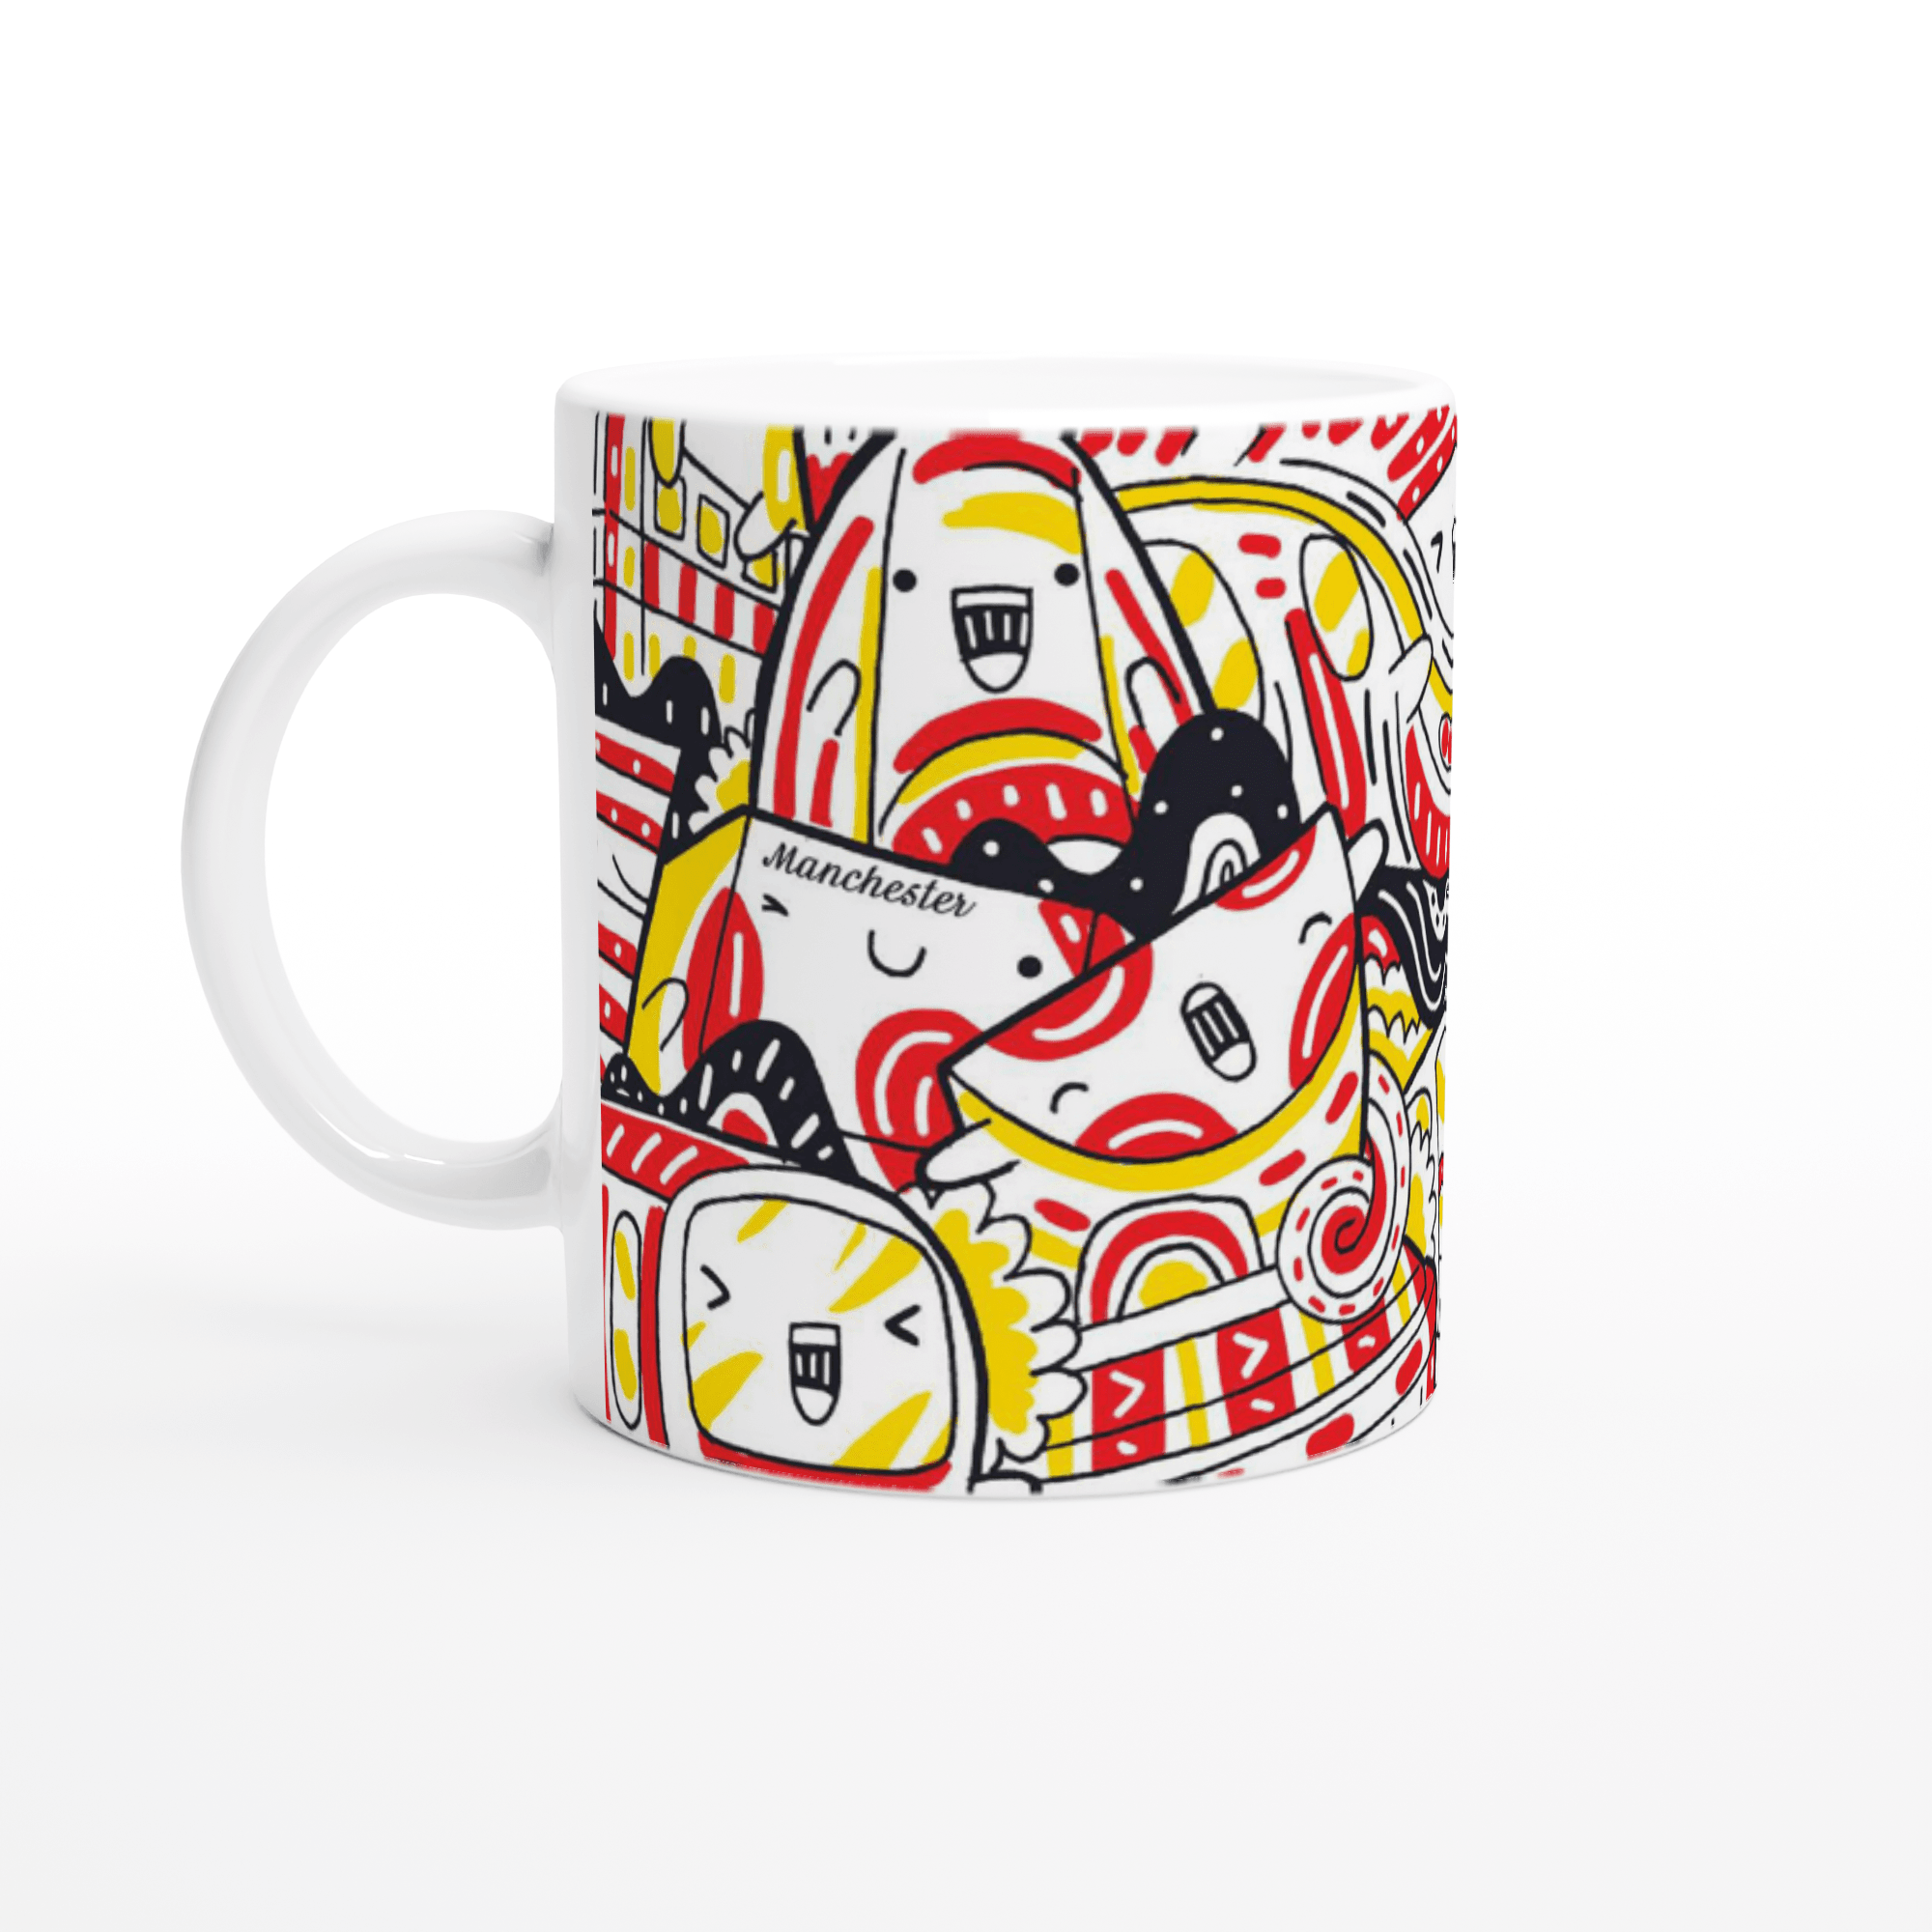 Manchester City Illustration,White 11oz Ceramic Mug, buy 3 get fourth one free use coupon 4for3, Manchester Father day gift - plusminusco.com